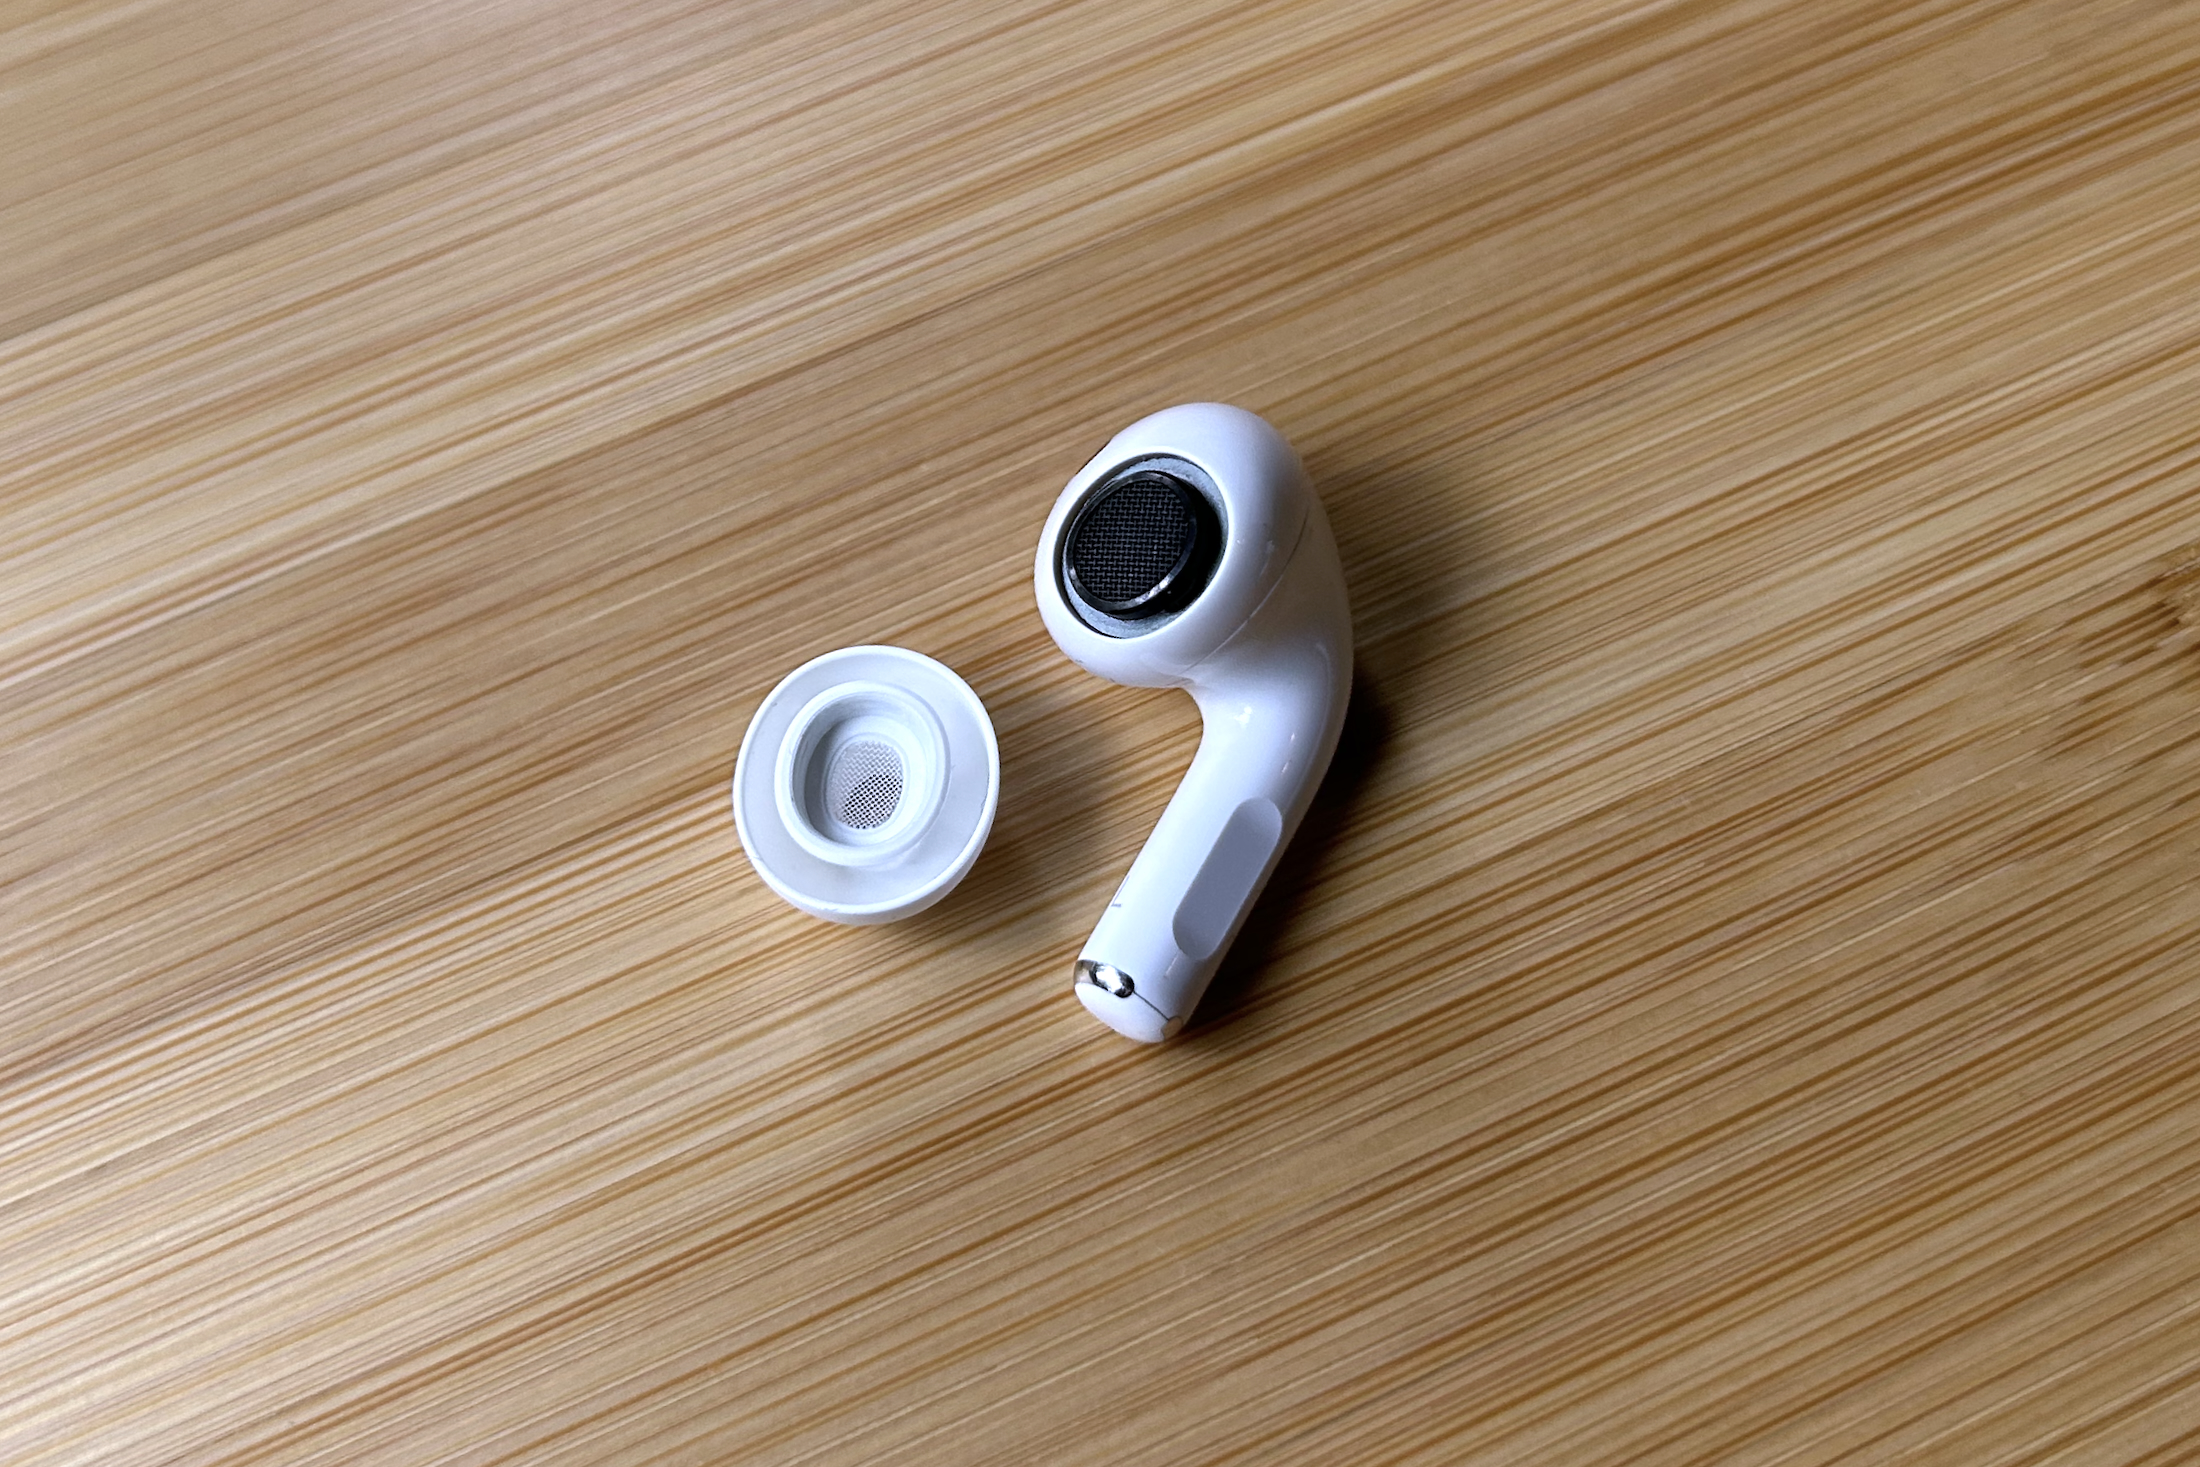 AirPods Pro (2nd generation) Ear Tips - 2 sets (Extra Small